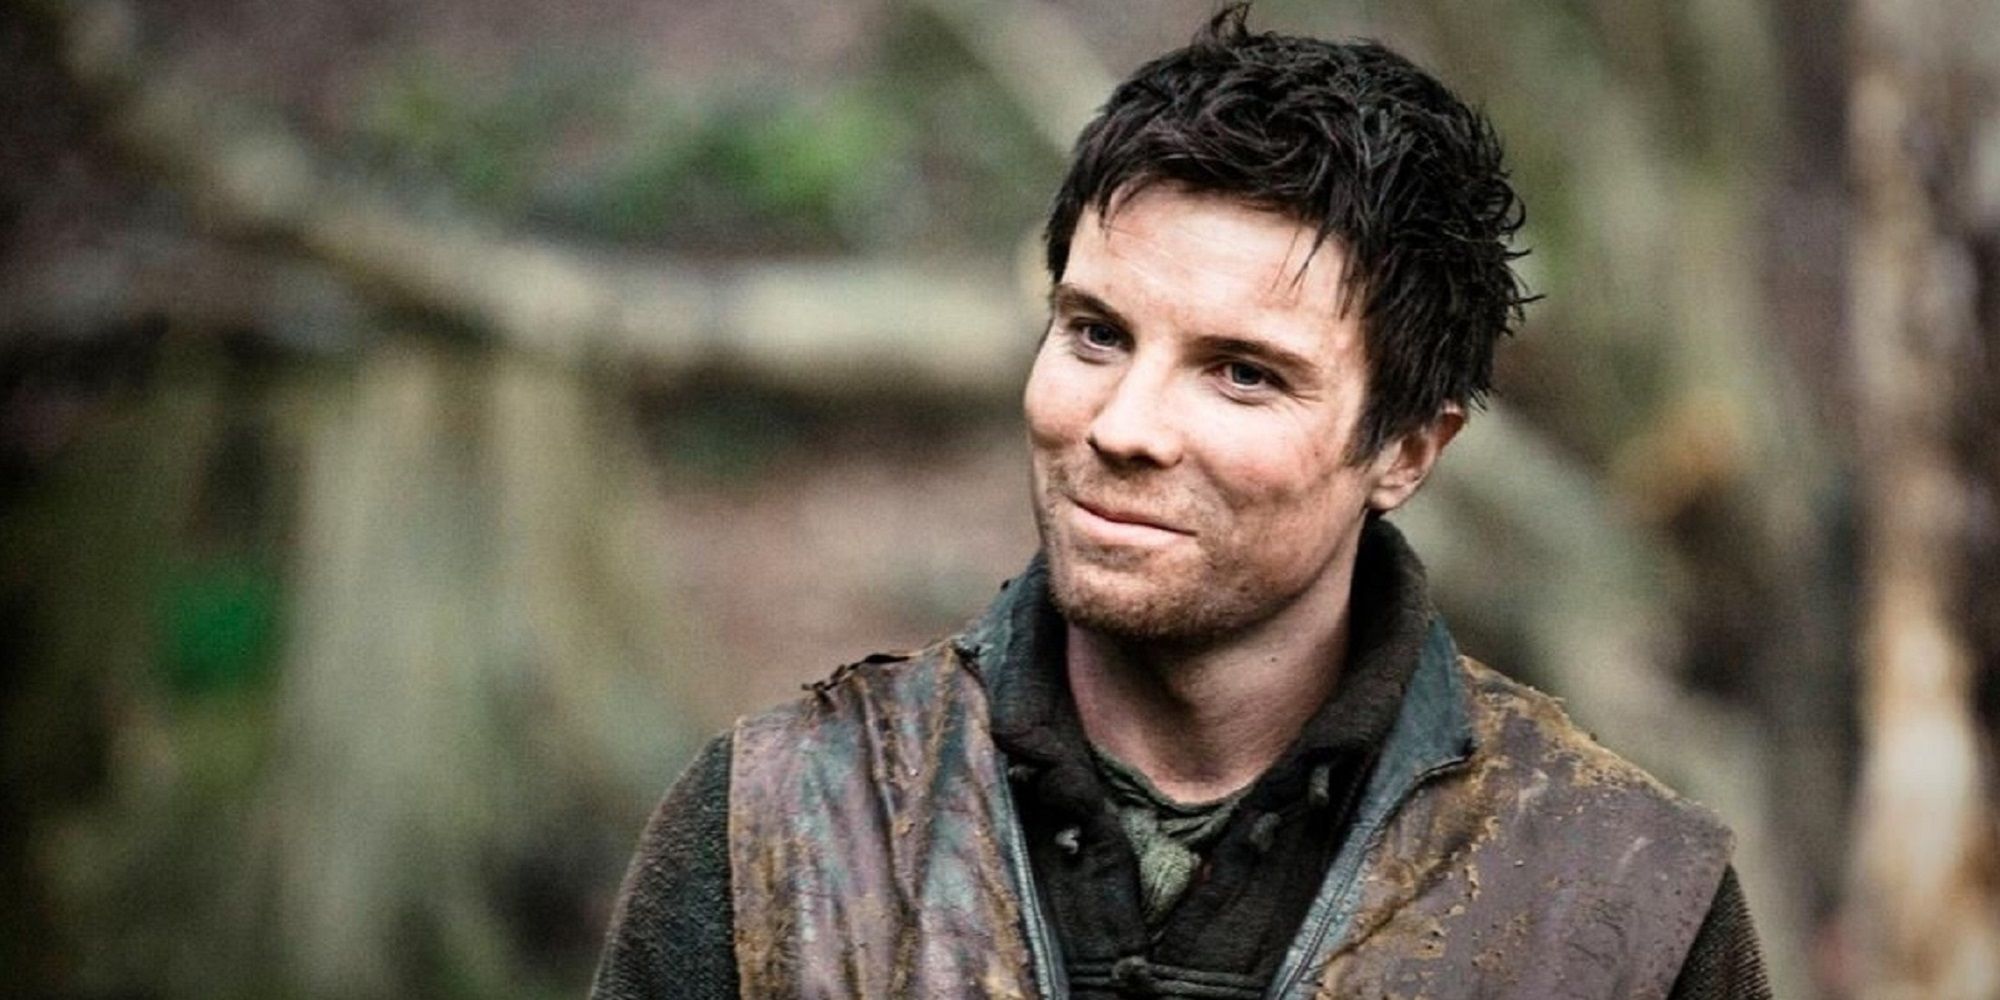 Gendry in a leather jerkin smiling